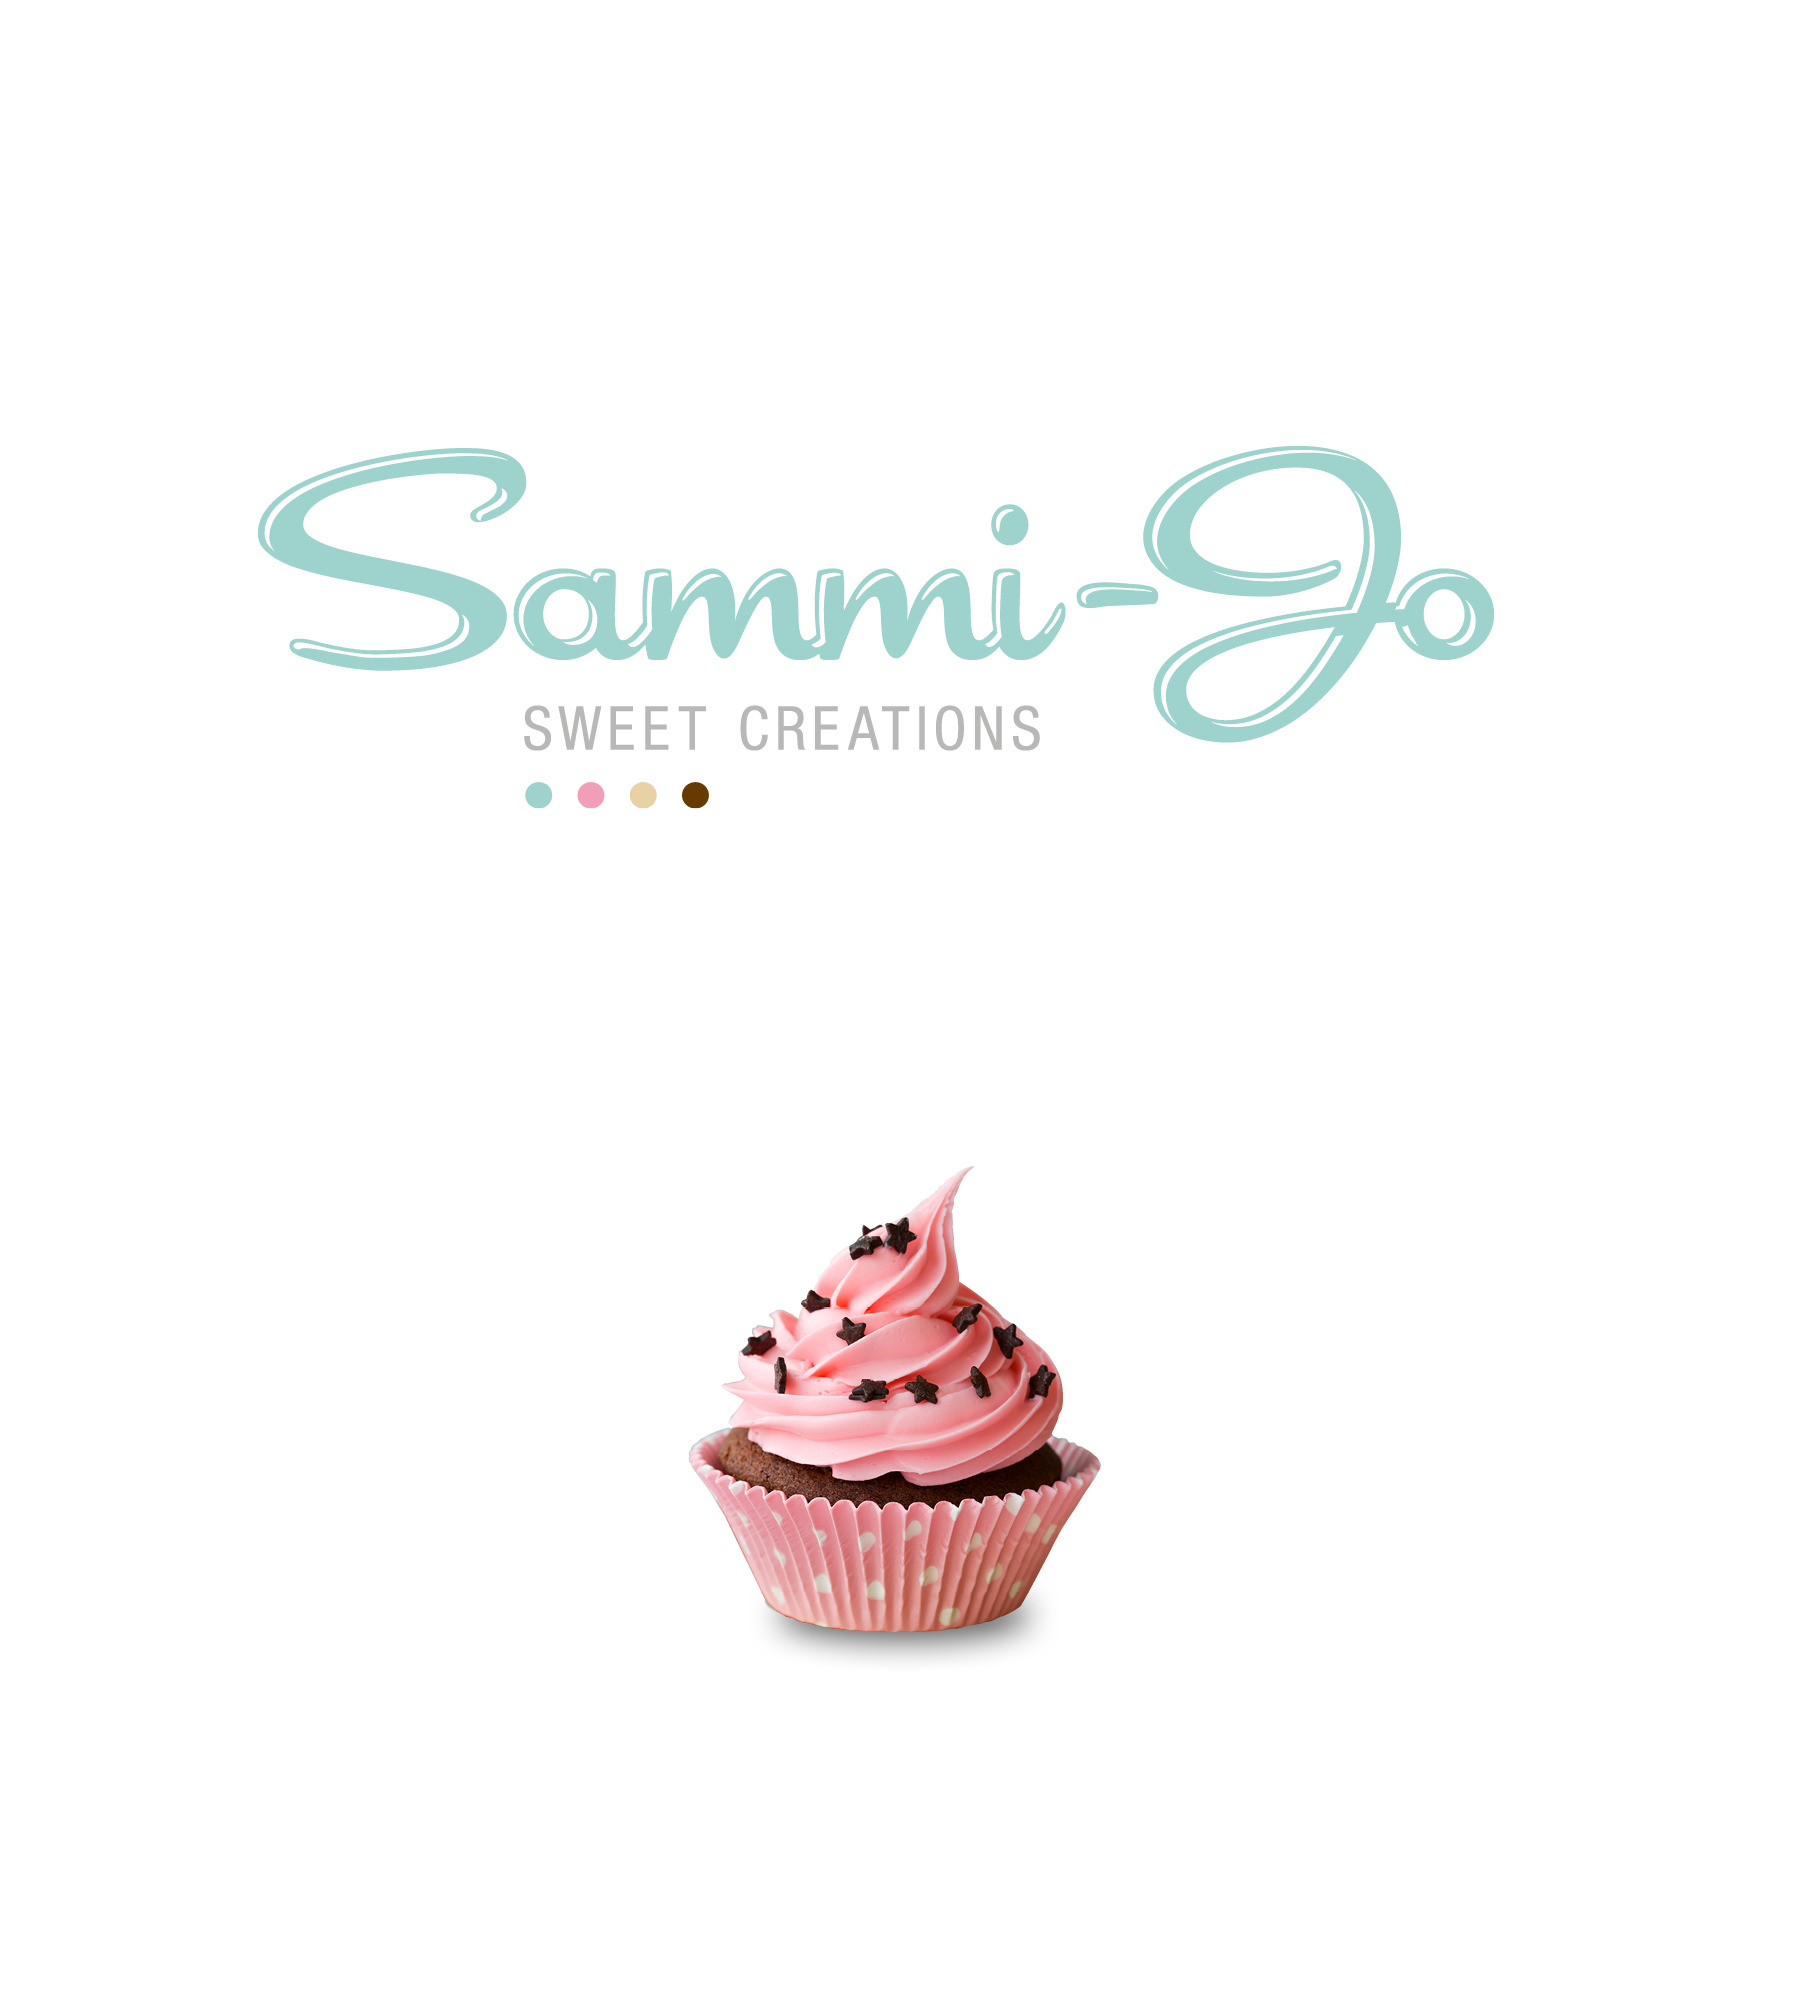 Sammi-Jo Sweet Creations - Creating a sweet sensation. Sammi-Jo is a boutique cake and dessert studio located in South Australia’s Riverland. Chef and founder, Joanna came to us to cook up a fun brand as beautiful as her custom creations. Our integrated brand strategy included corporate collateral, signage, packaging design, online marketing and trade show materials. For Joanna, it’s been a sweet success story!